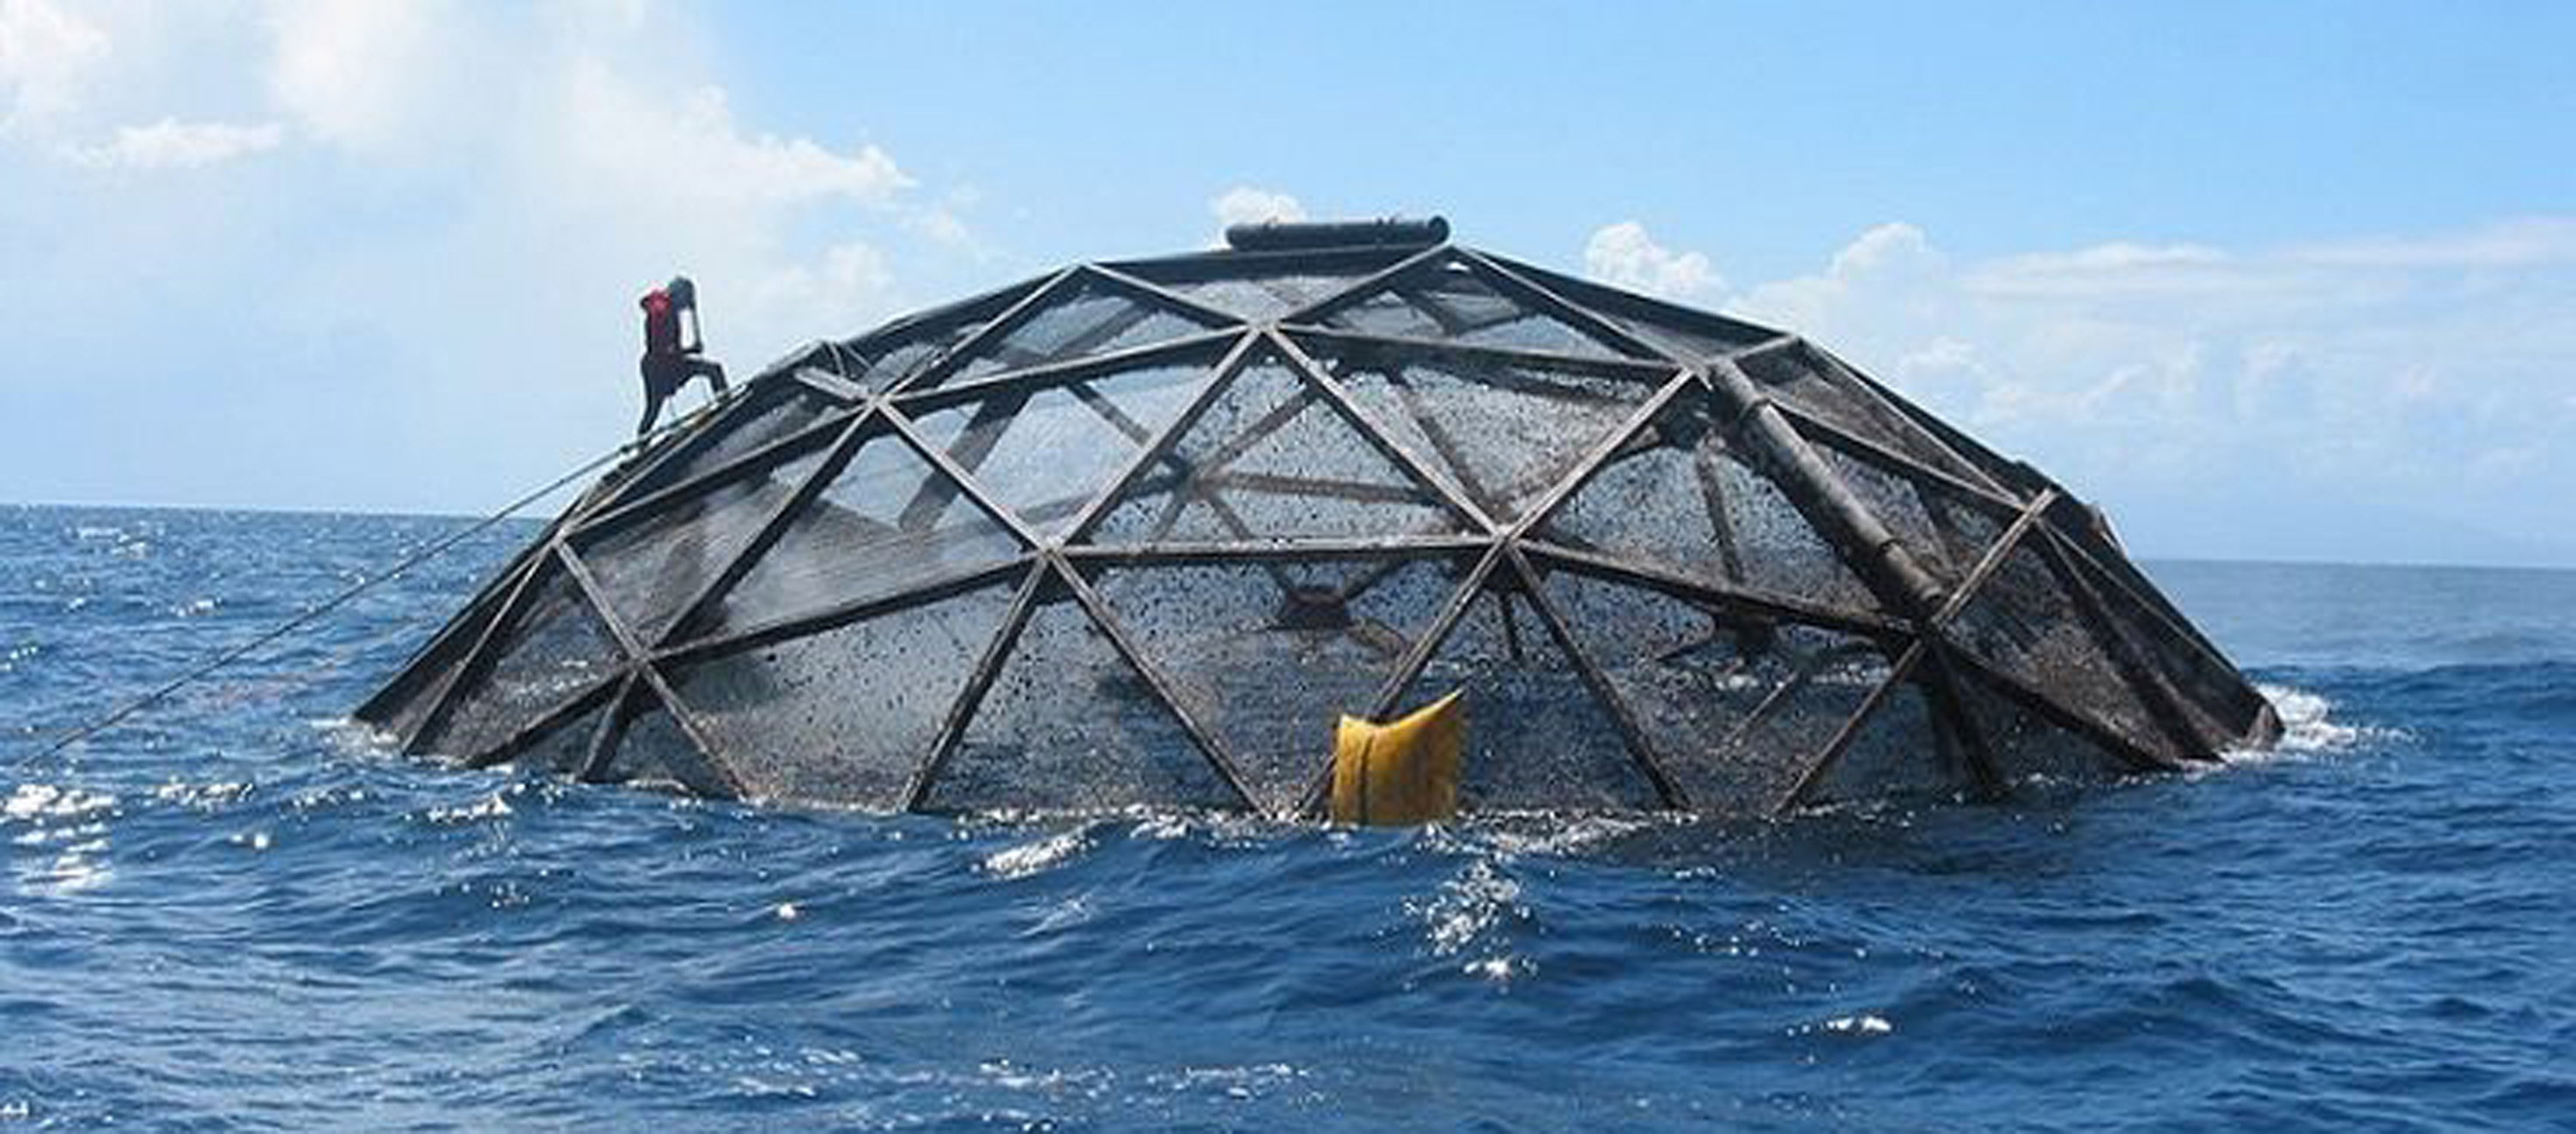 This Aquapod, or cage, allows farmers to grow fish in the open ocean, away from crowded coastlines. With NOAA's cutting-edge research and industry's innovative designs, seafood producers can expand sustainable and environmentally-sound farming out to sea.